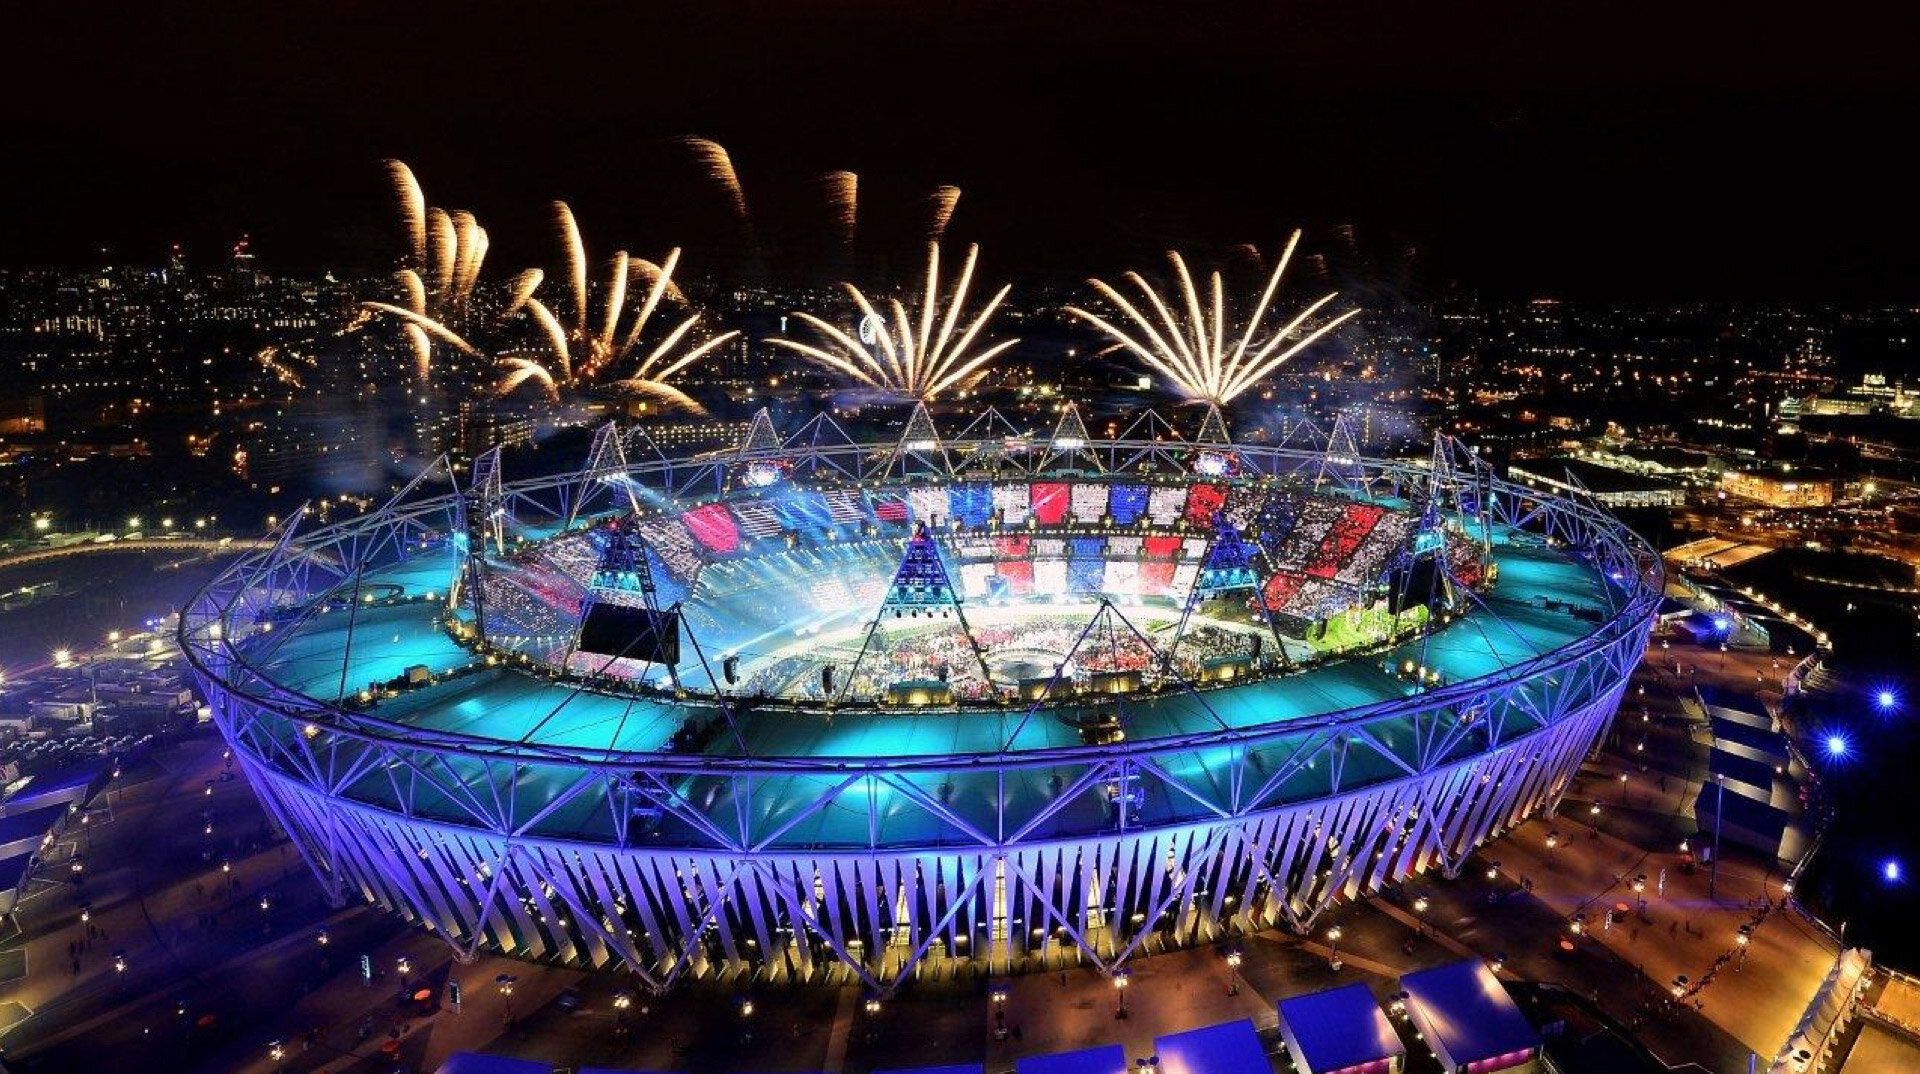 London 2012 Olympic and Paralympic Games Ceremonies